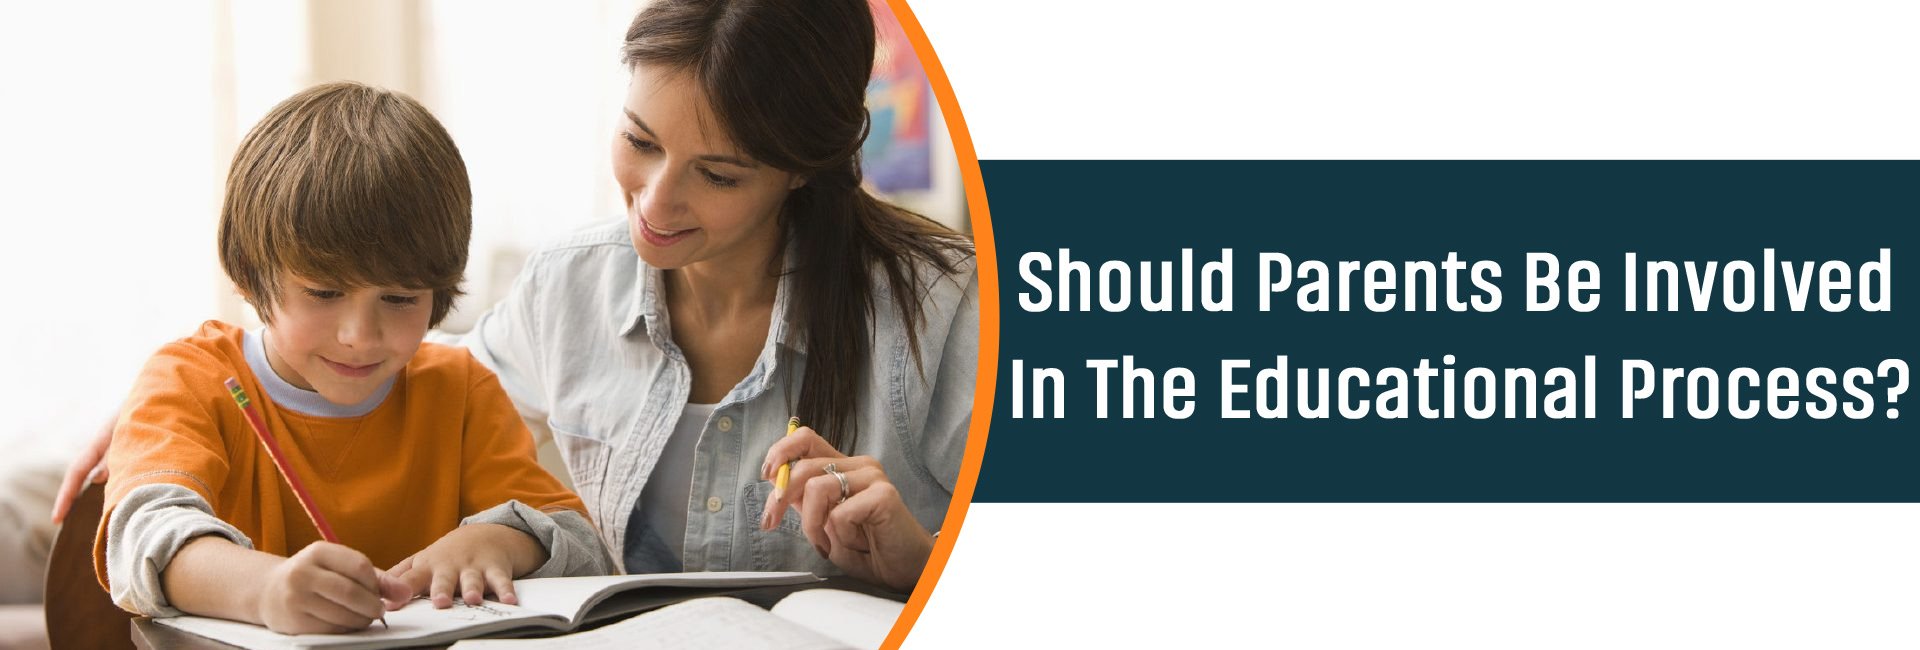 Should Parents Be Involved In The Educational Process